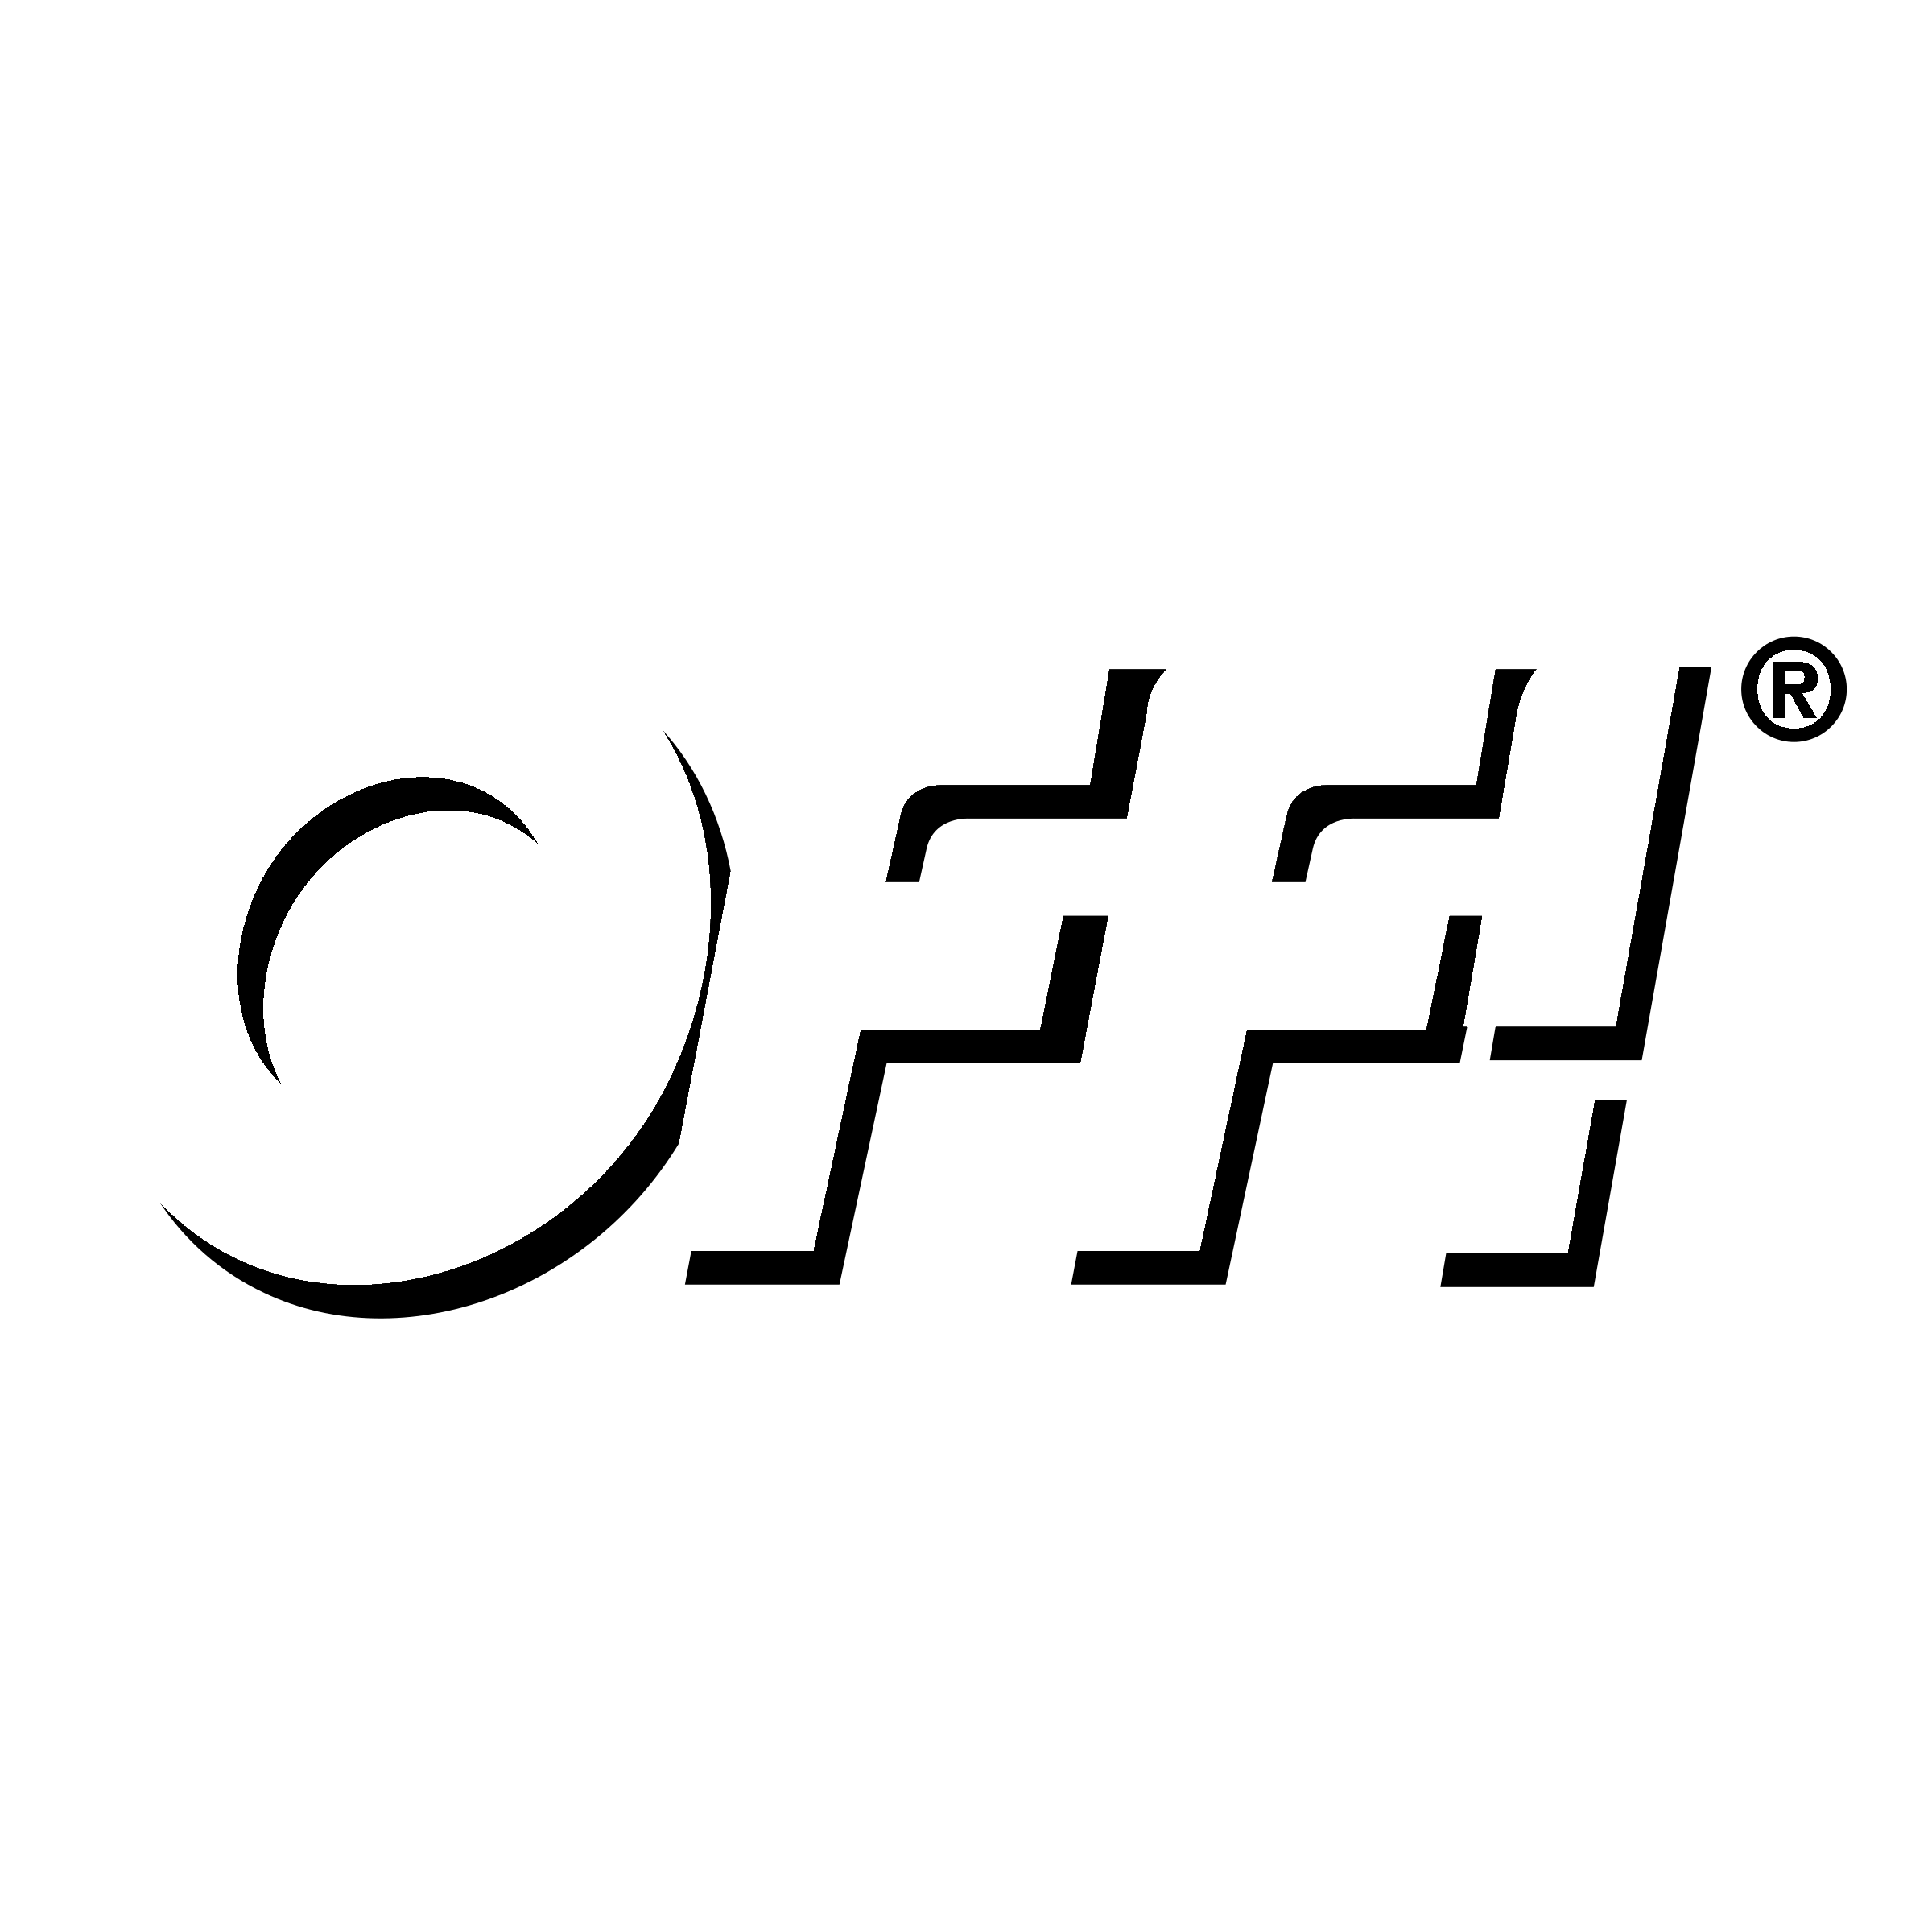 Off White Logo PNG Transparent Images - PNG All